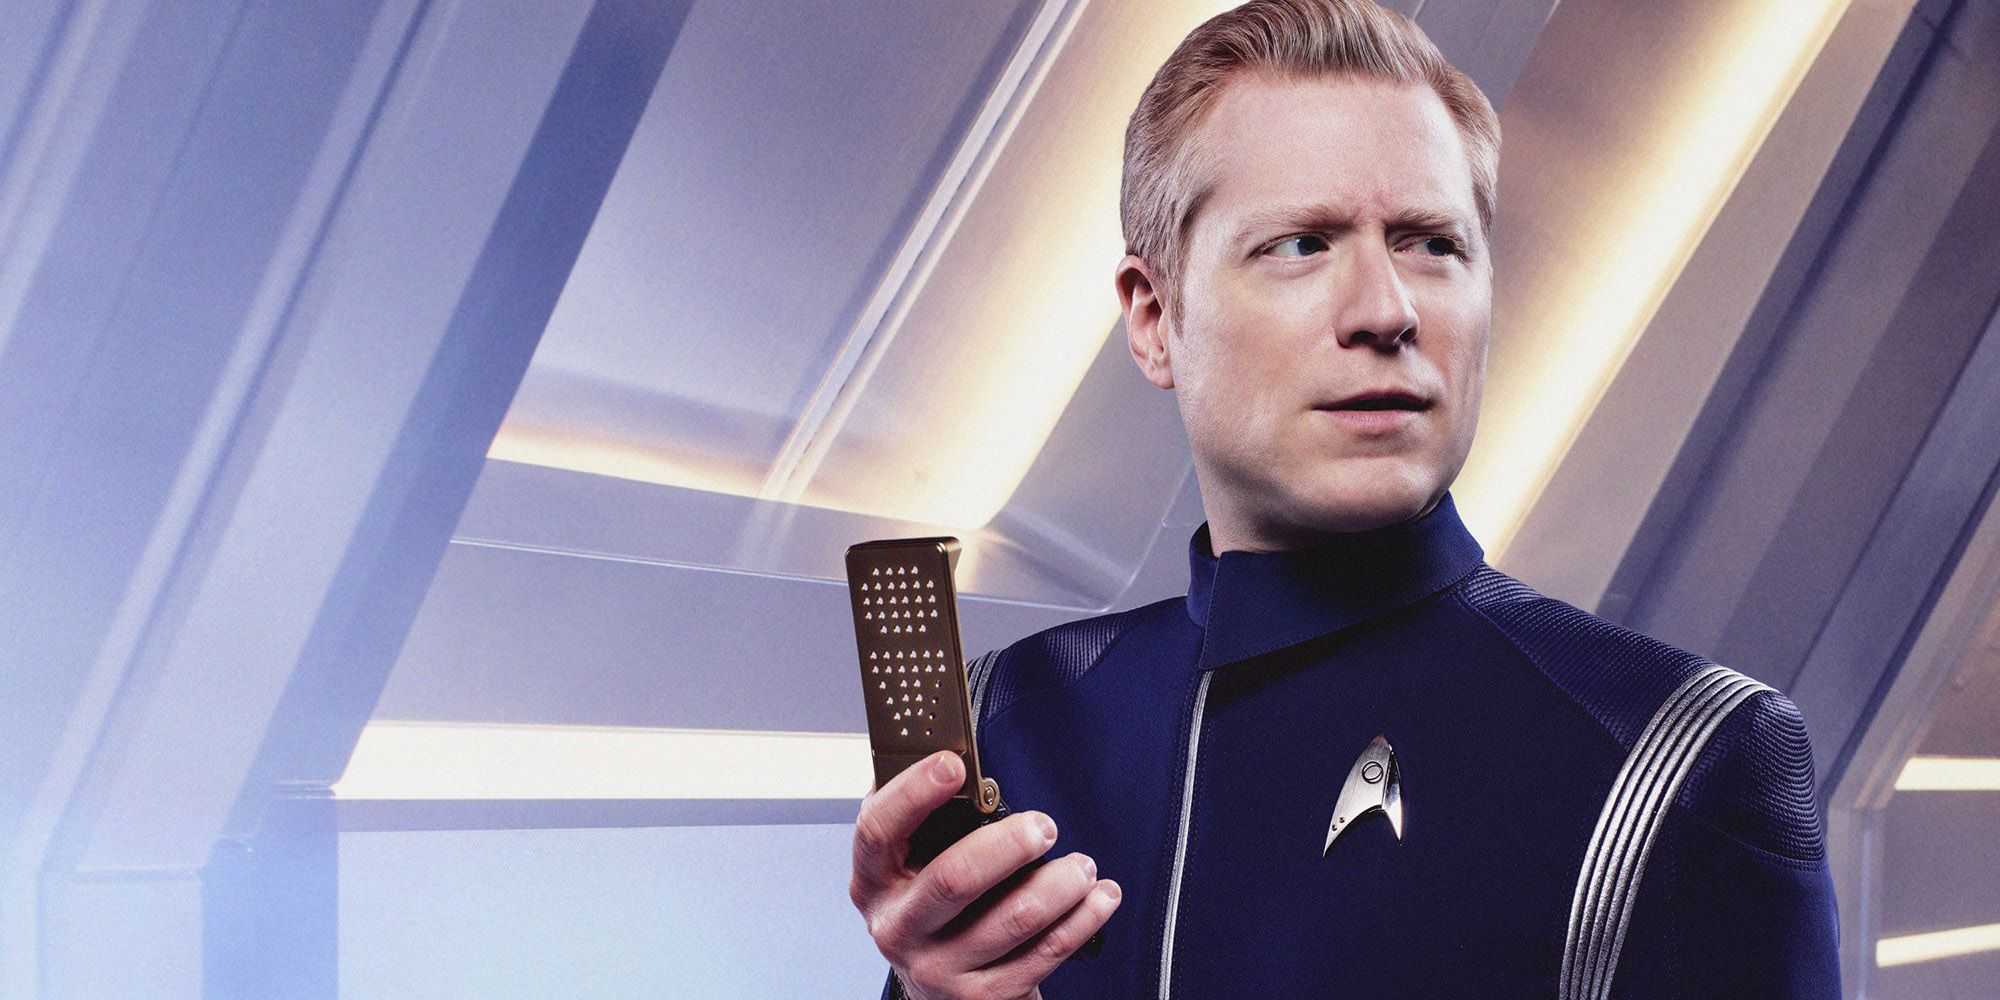 Star Trek: Discovery: Is Stamets From The Mirror Universe?